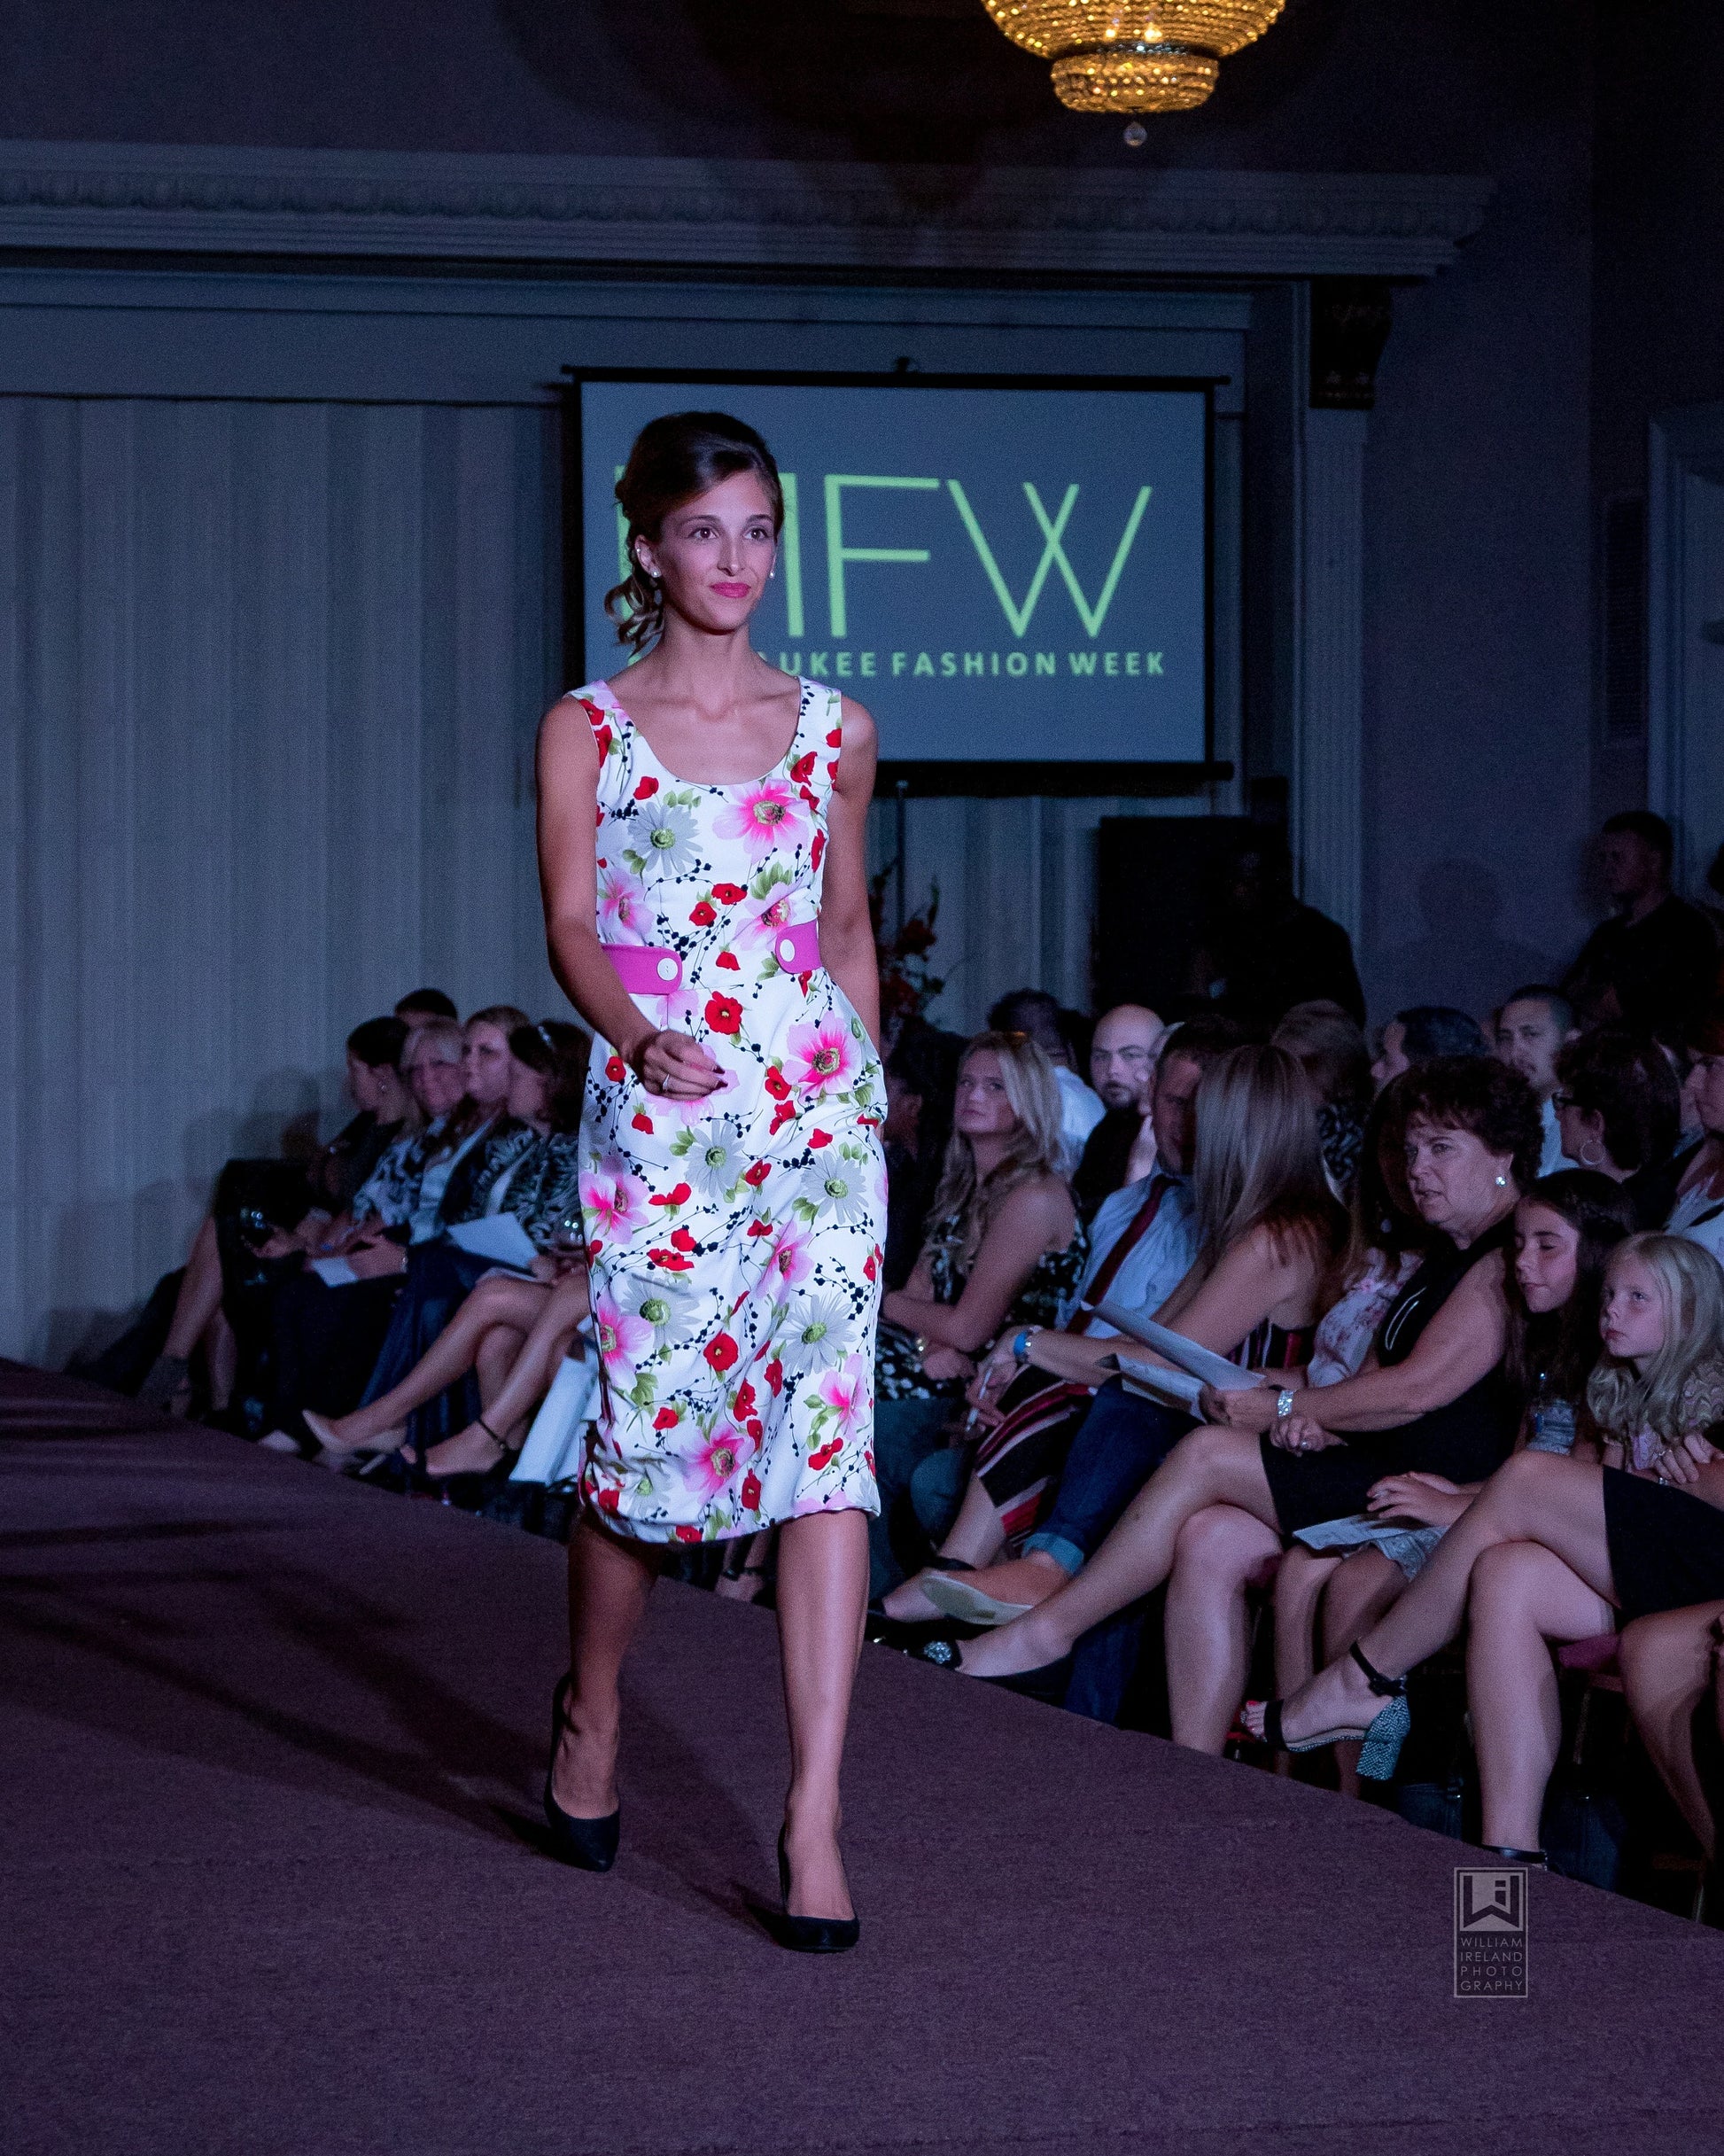 Pink Floral Wiggle Dress by Hollyville
Milwaukee Fashion Week